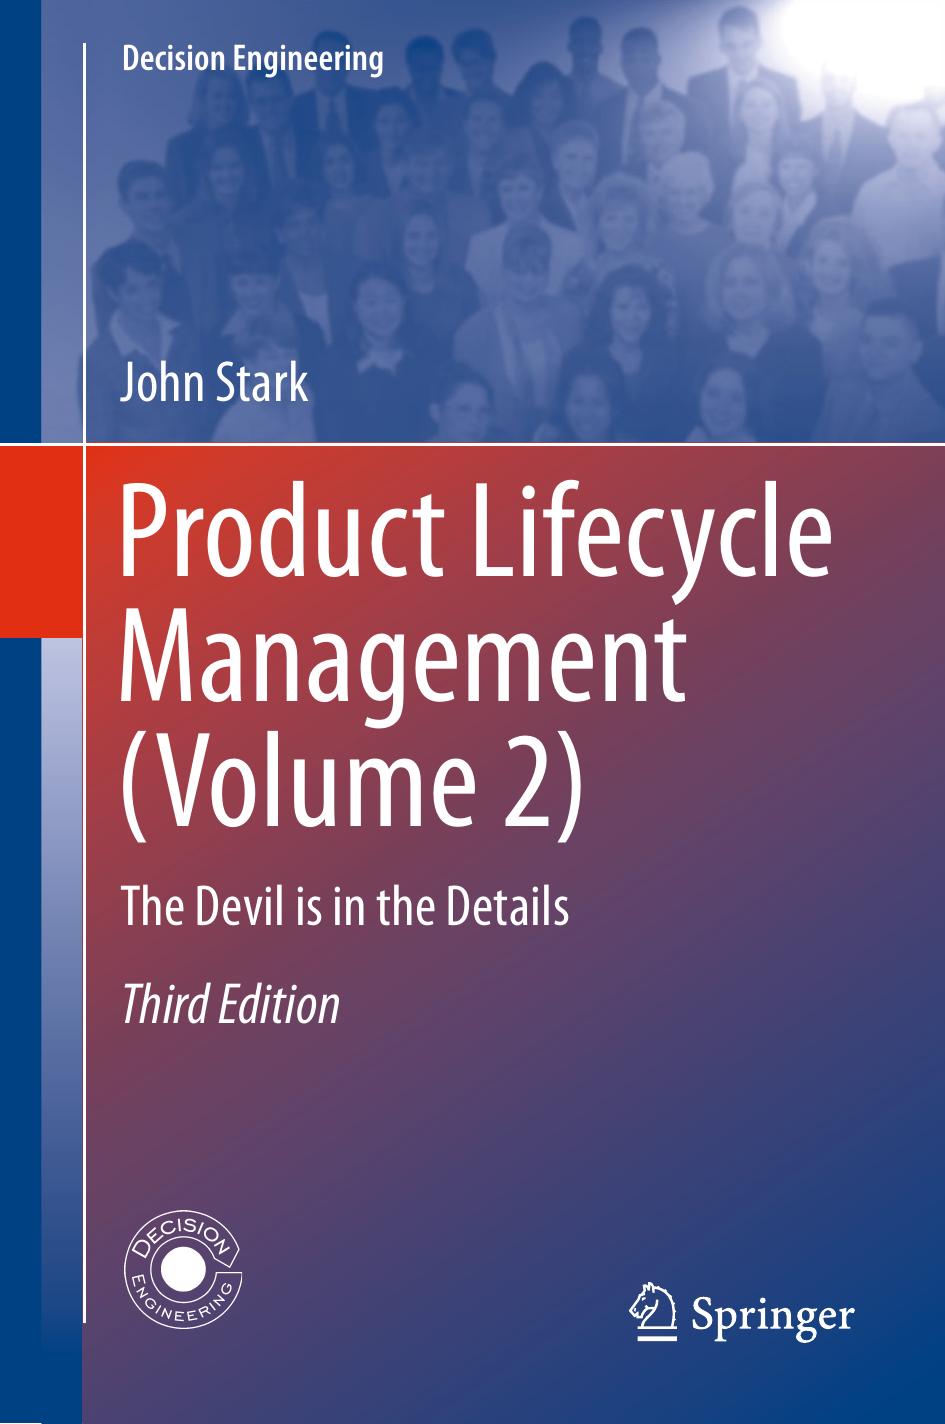 Product Lifecycle Management (Volume 2) 2016